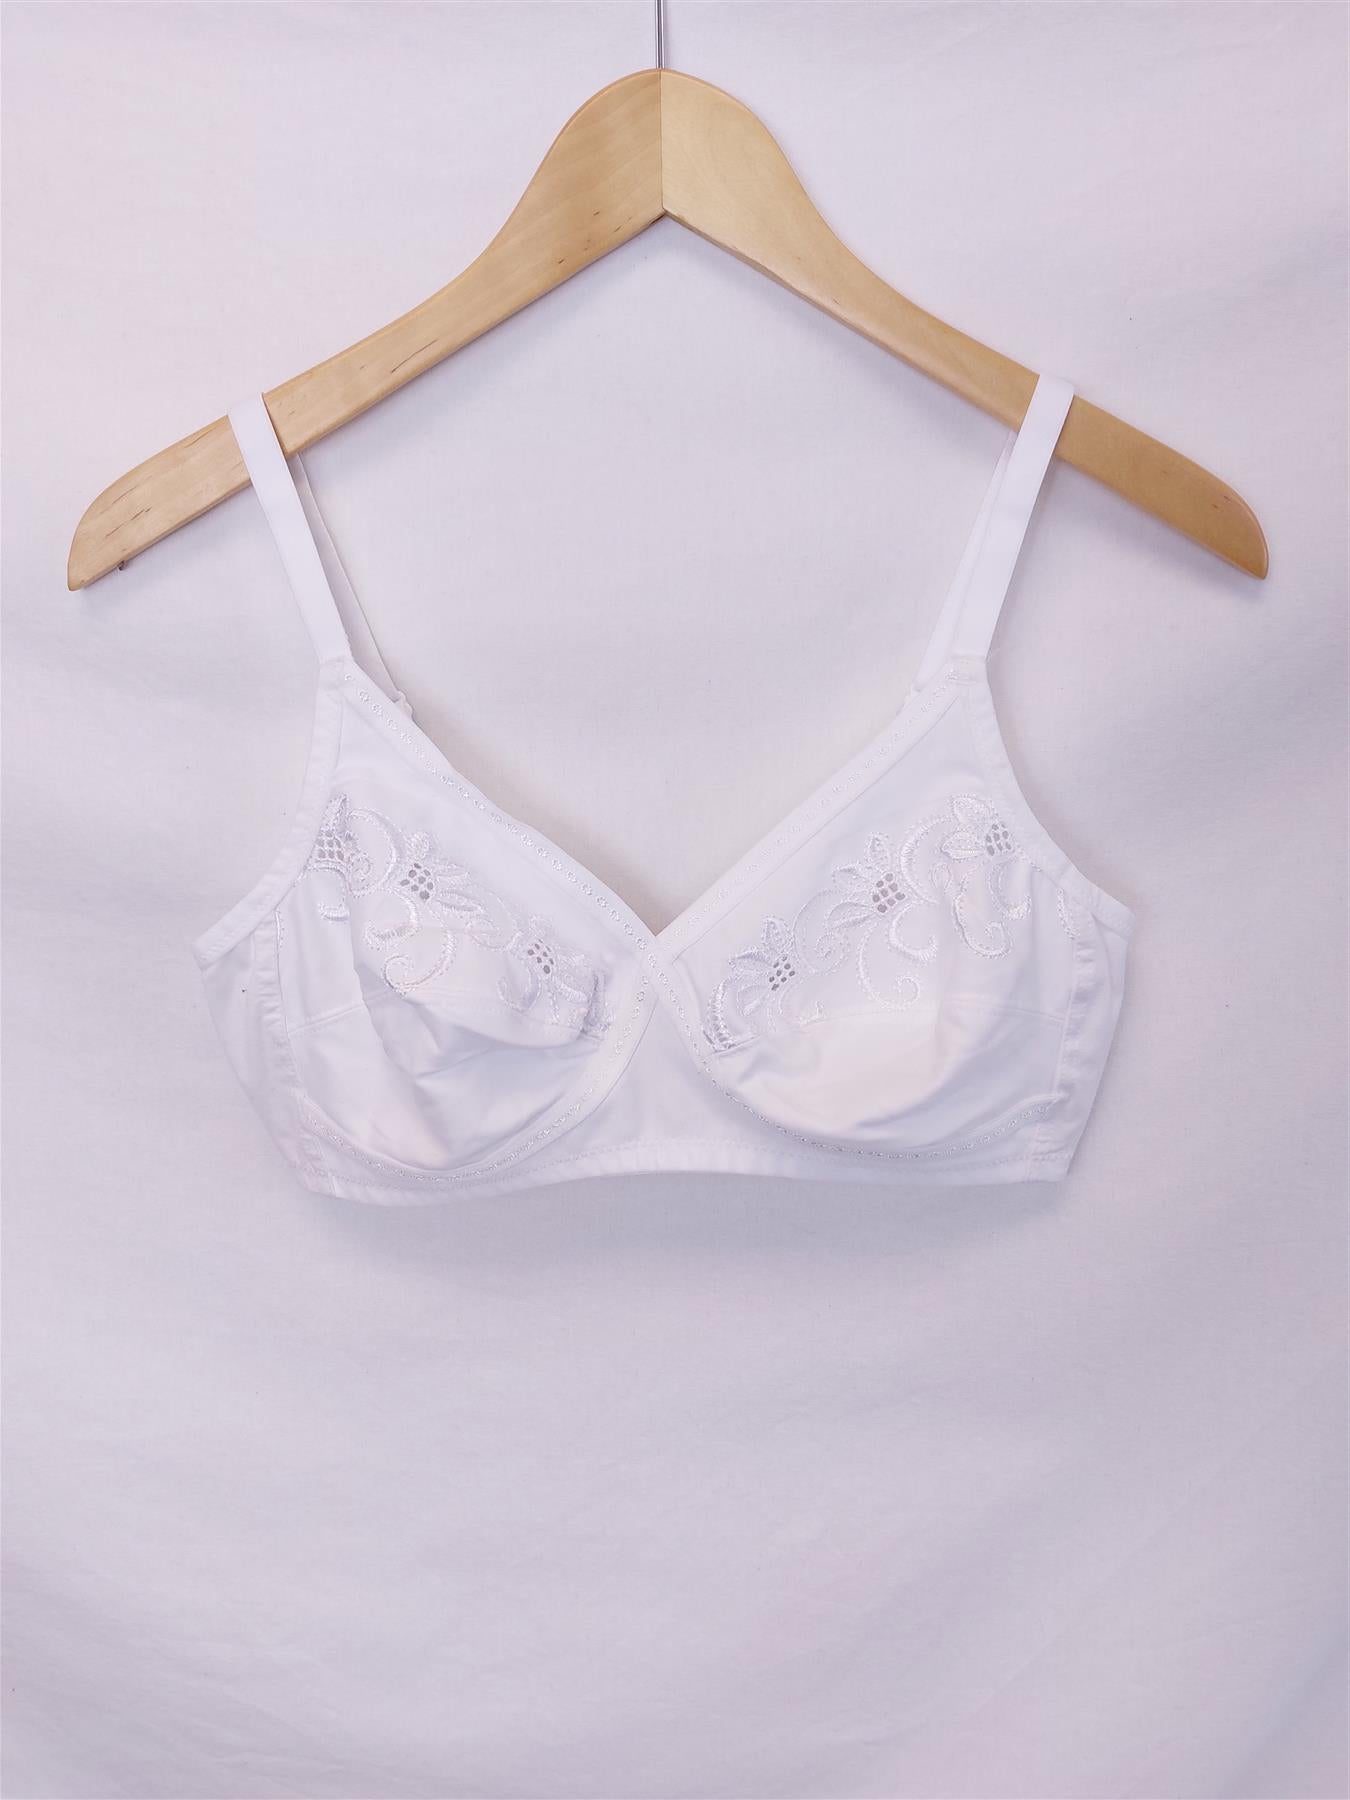 Comfort Support Bra Unpadded Non-Wired Embroidered High Street New 32-44 B-DD